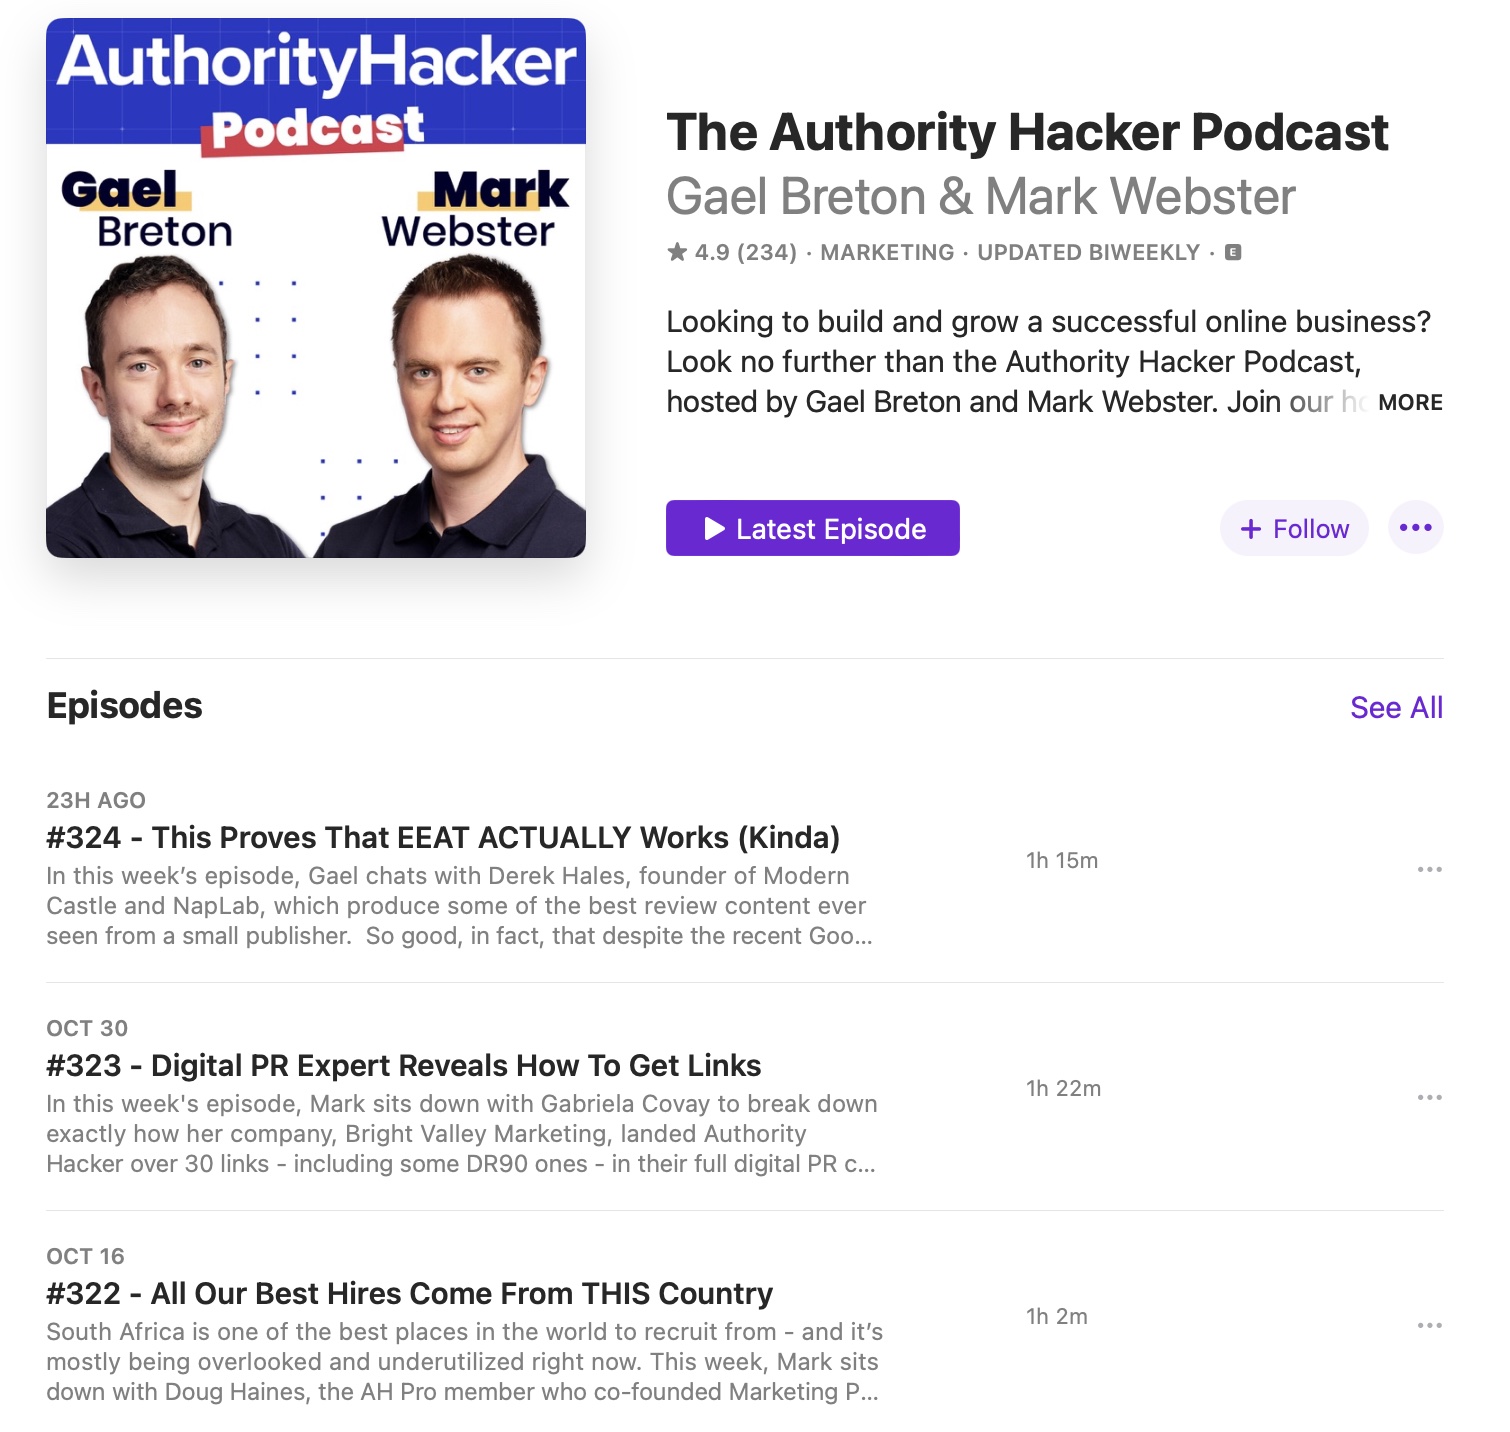 The Authority Hacker Podcast page